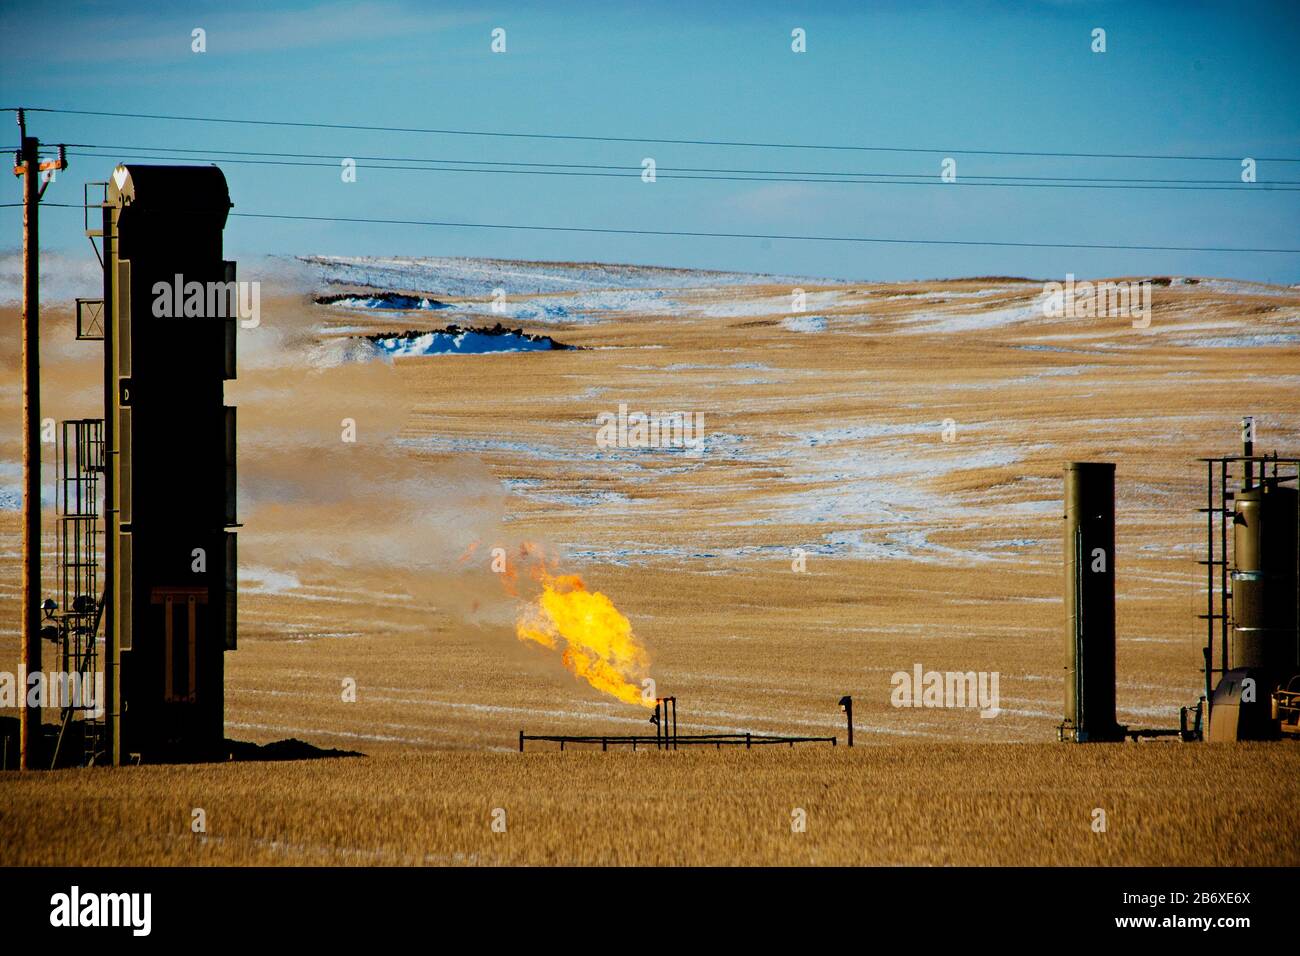 Flaring of gas from an oil well outside Williston in North Dakota. The area is part of the Bakken oil field, where fracking technology has made it profitable as long as the oil price stays above USD 46 per barrel. Stock Photo